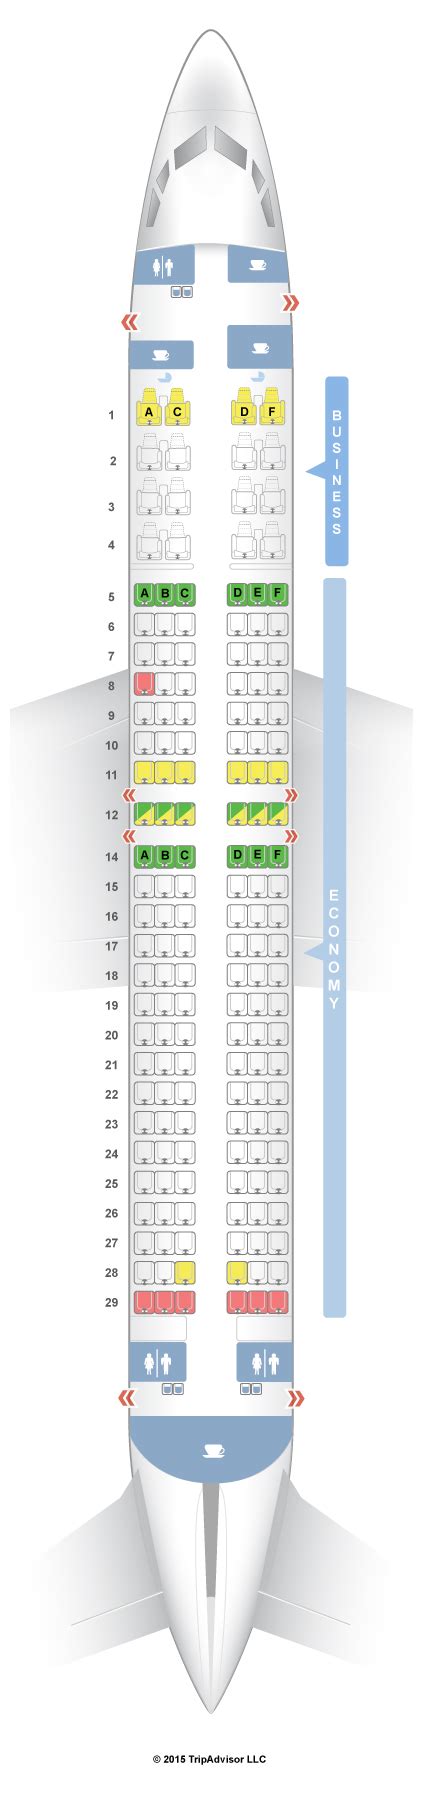 boeing 737-800 seating chart malaysia airline